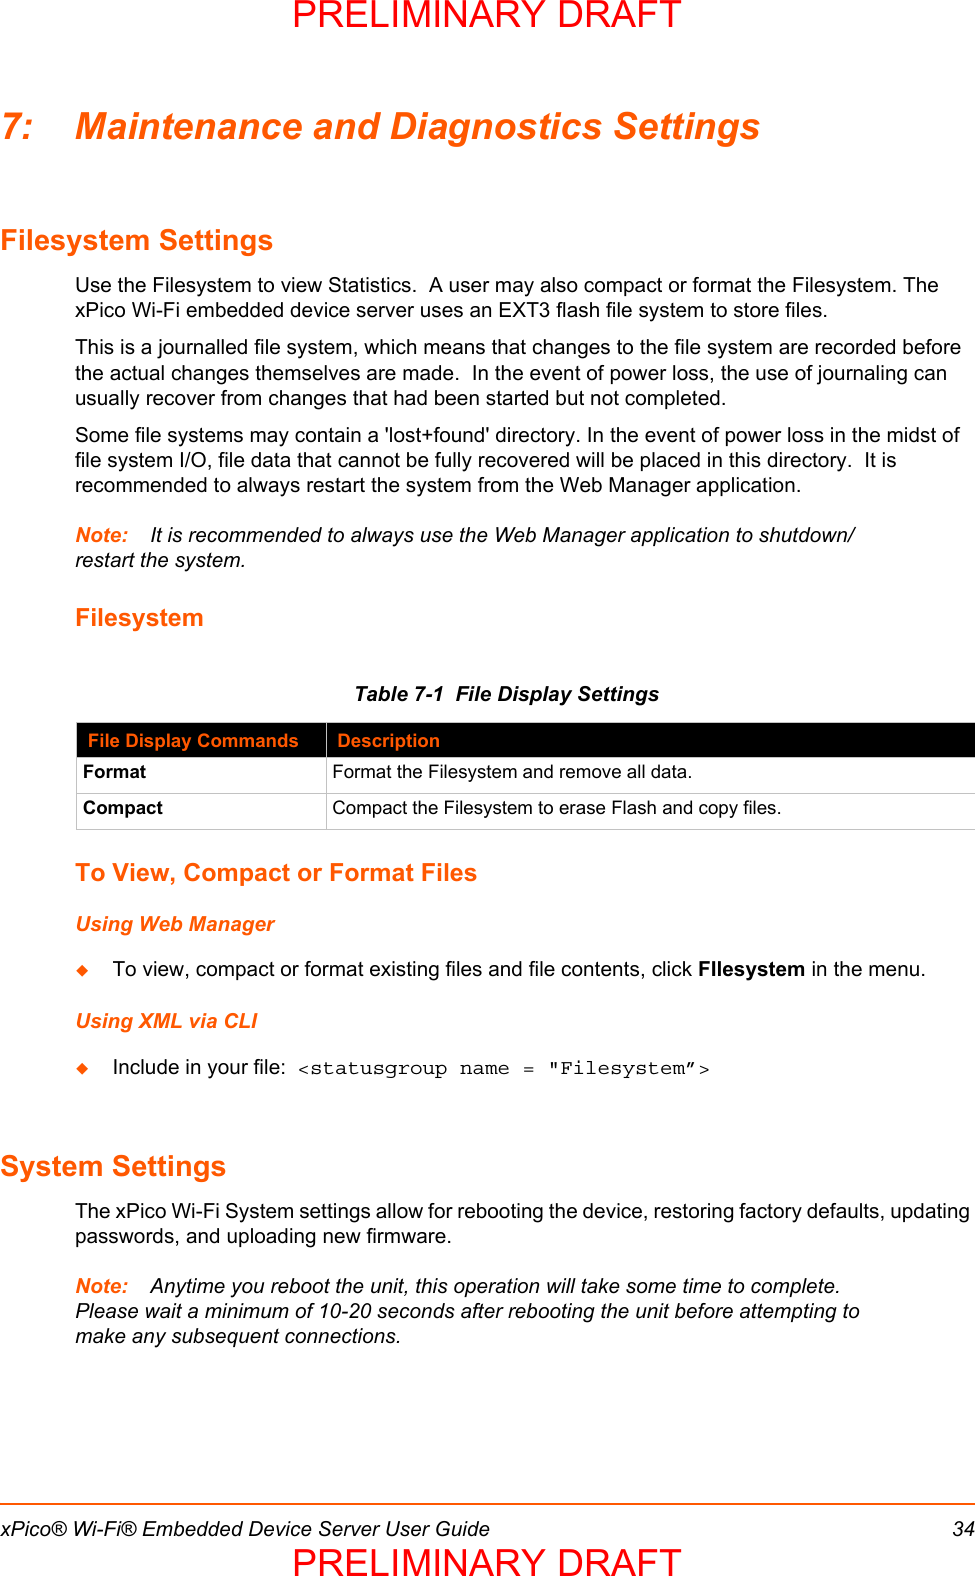 xPico® Wi-Fi® Embedded Device Server User Guide 347: Maintenance and Diagnostics SettingsFilesystem SettingsUse the Filesystem to view Statistics.  A user may also compact or format the Filesystem. The xPico Wi-Fi embedded device server uses an EXT3 flash file system to store files.This is a journalled file system, which means that changes to the file system are recorded before the actual changes themselves are made.  In the event of power loss, the use of journaling can usually recover from changes that had been started but not completed.Some file systems may contain a &apos;lost+found&apos; directory. In the event of power loss in the midst of file system I/O, file data that cannot be fully recovered will be placed in this directory.  It is recommended to always restart the system from the Web Manager application.Note: It is recommended to always use the Web Manager application to shutdown/restart the system.FilesystemTable 7-1  File Display SettingsTo View, Compact or Format FilesUsing Web ManagerTo view, compact or format existing files and file contents, click FIlesystem in the menu.Using XML via CLIInclude in your file:  &lt;statusgroup name = &quot;Filesystem”&gt;System SettingsThe xPico Wi-Fi System settings allow for rebooting the device, restoring factory defaults, updating passwords, and uploading new firmware. Note: Anytime you reboot the unit, this operation will take some time to complete. Please wait a minimum of 10-20 seconds after rebooting the unit before attempting to make any subsequent connections.File Display Commands DescriptionFormat Format the Filesystem and remove all data.Compact Compact the Filesystem to erase Flash and copy files.PRELIMINARY DRAFTPRELIMINARY DRAFT